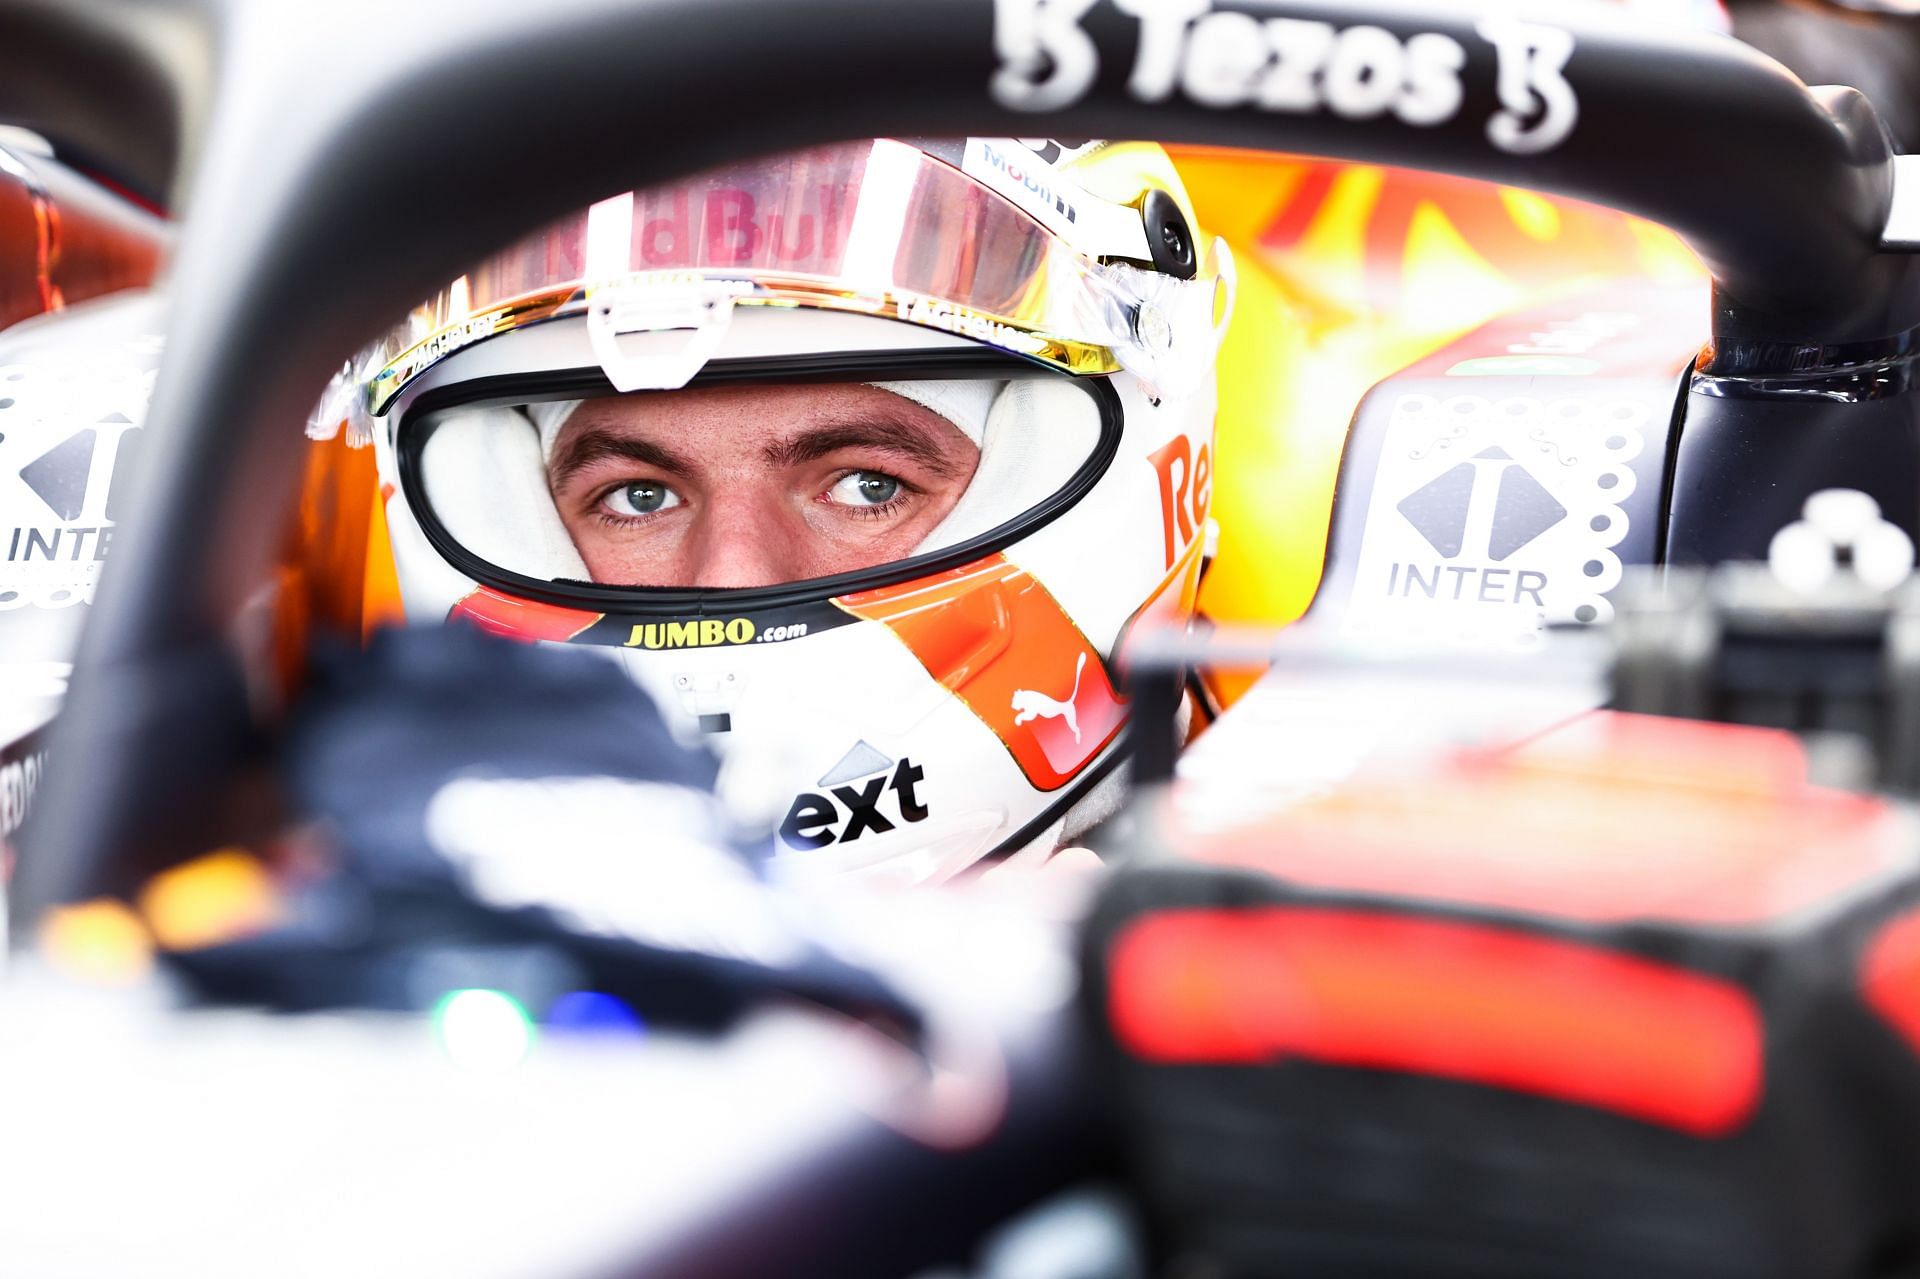 Max Verstappenprepares to drive in the garage during practice ahead of the 2021 Mexican GP. (Photo by Mark Thompson/Getty Images)